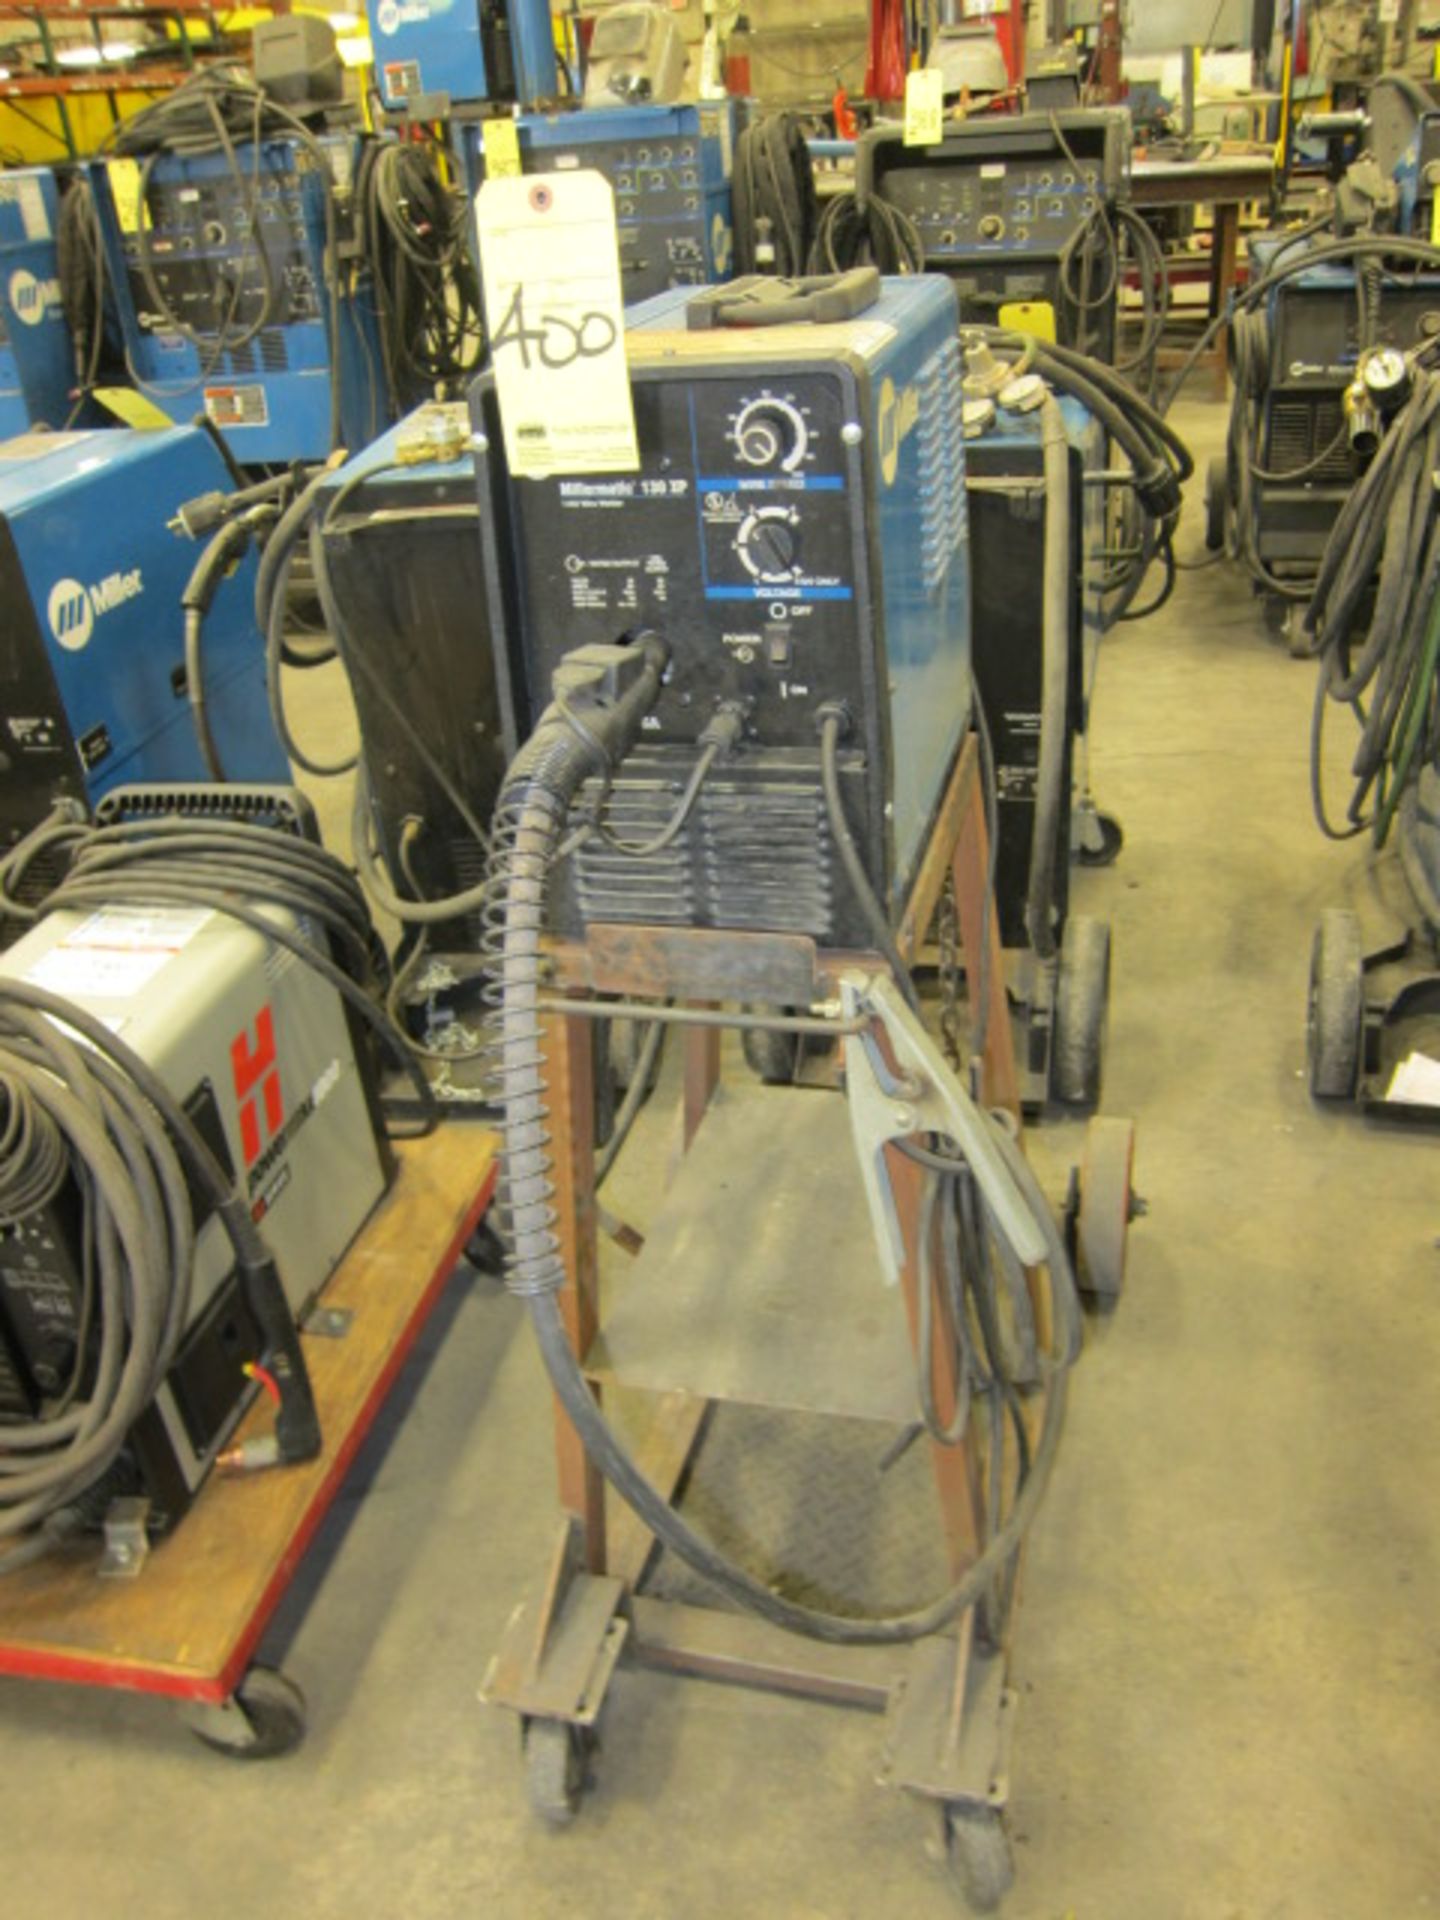 INTEGRATED MIG WELDER, MILLER MILLERMATIC MDL. 130XP, 63 amp @ 20 v., 20% duty cycle, fabricated